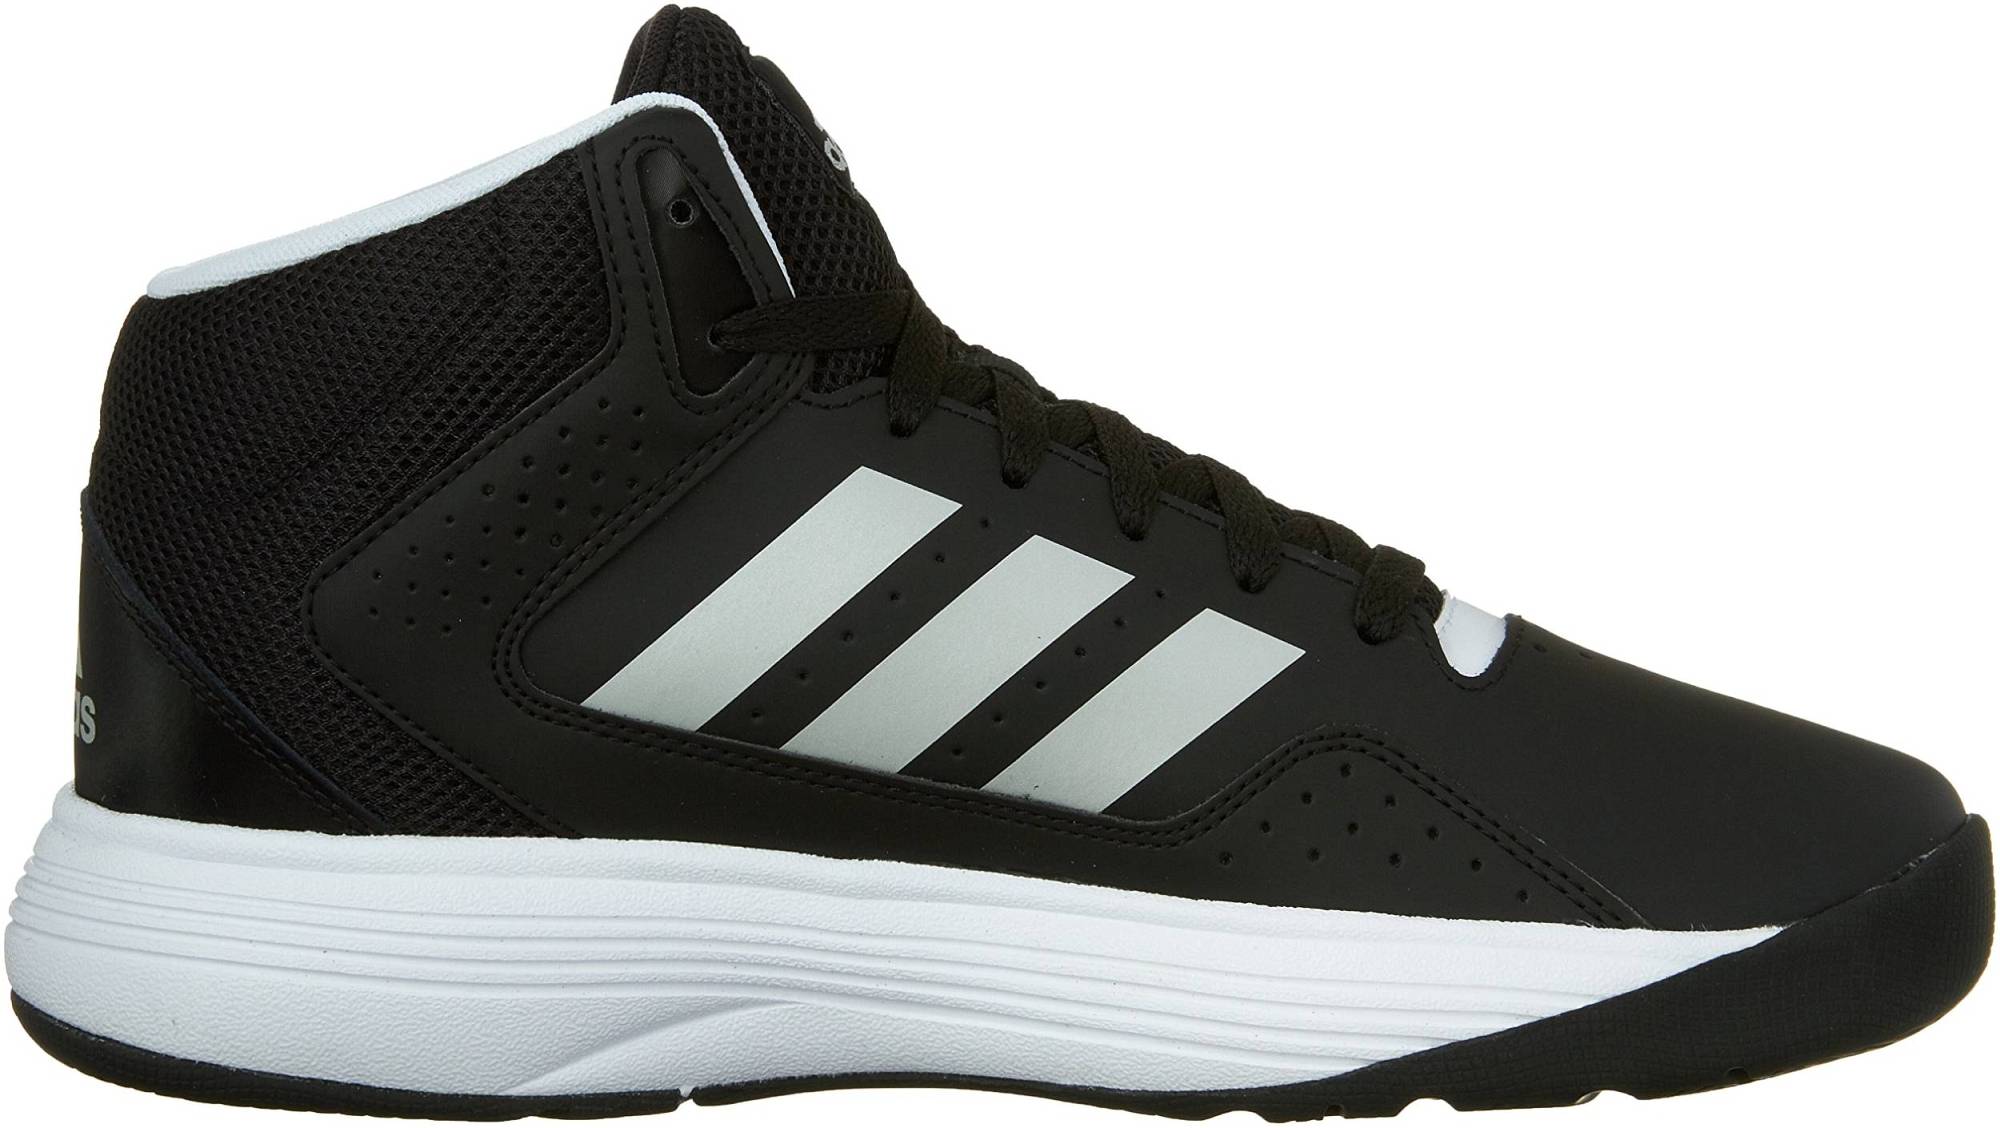 Adidas Cloudfoam Ilation Mid – Shoes Reviews & Reasons To Buy